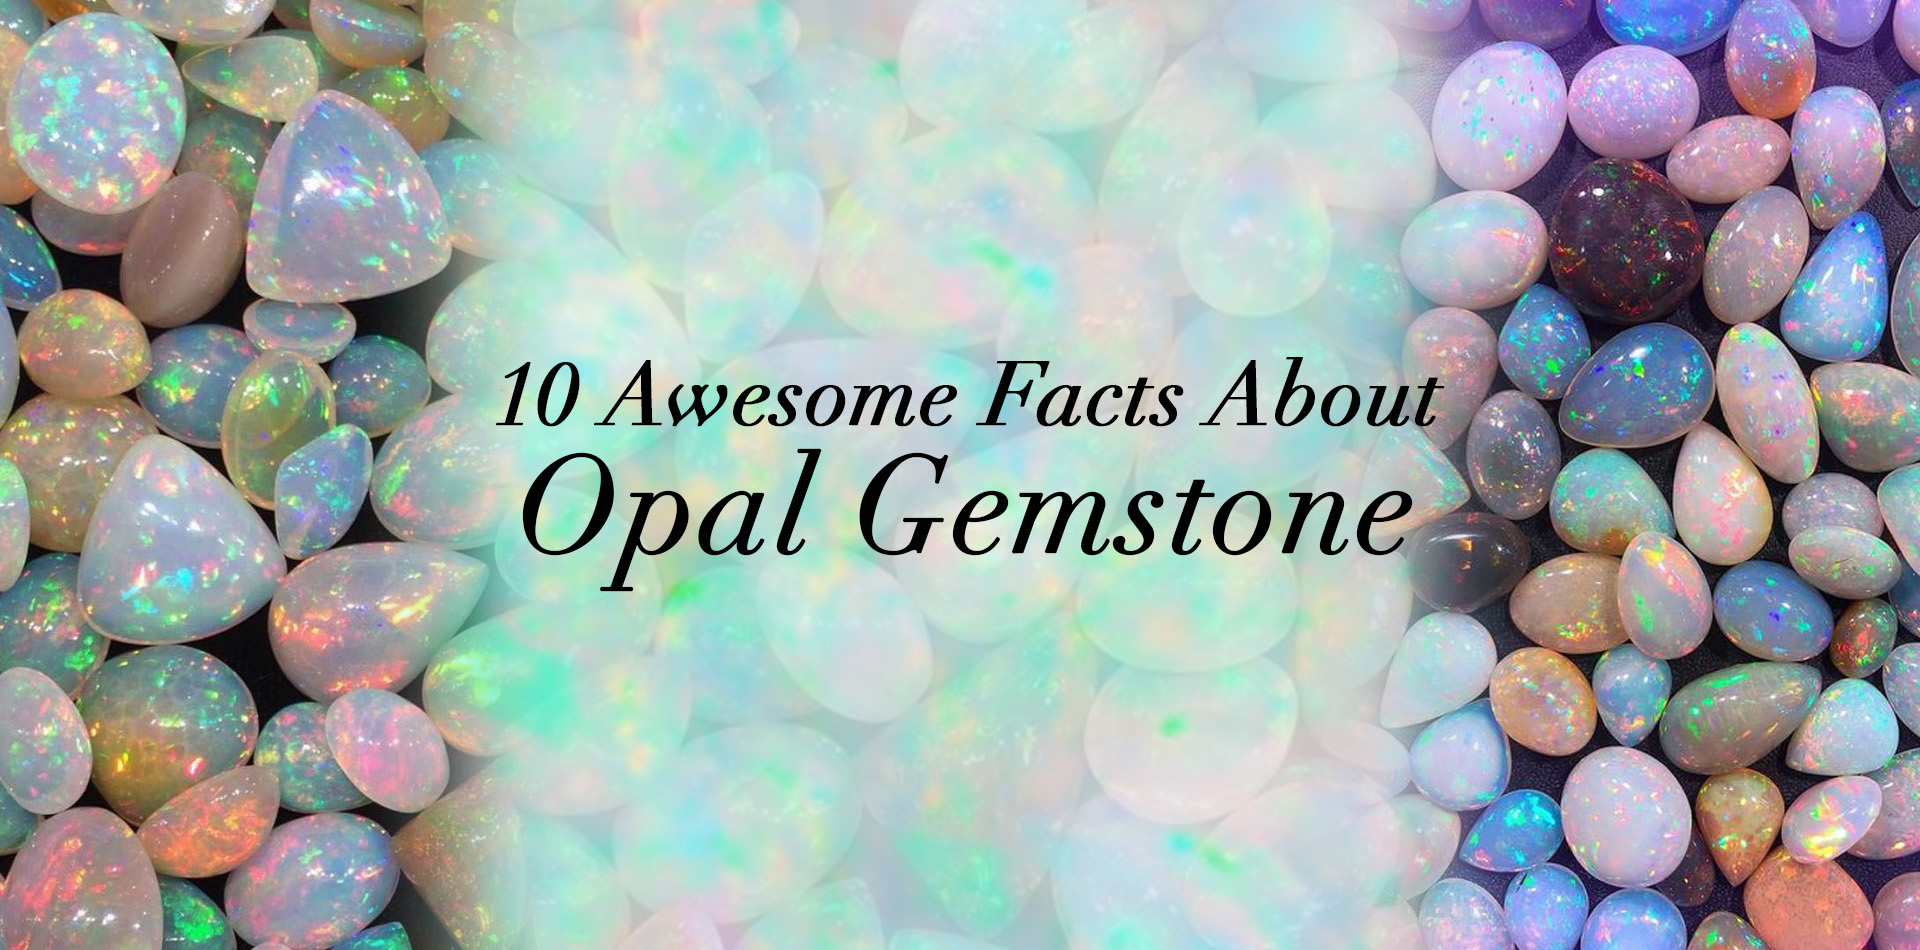 10 Awesome Facts About Opal Gemstones